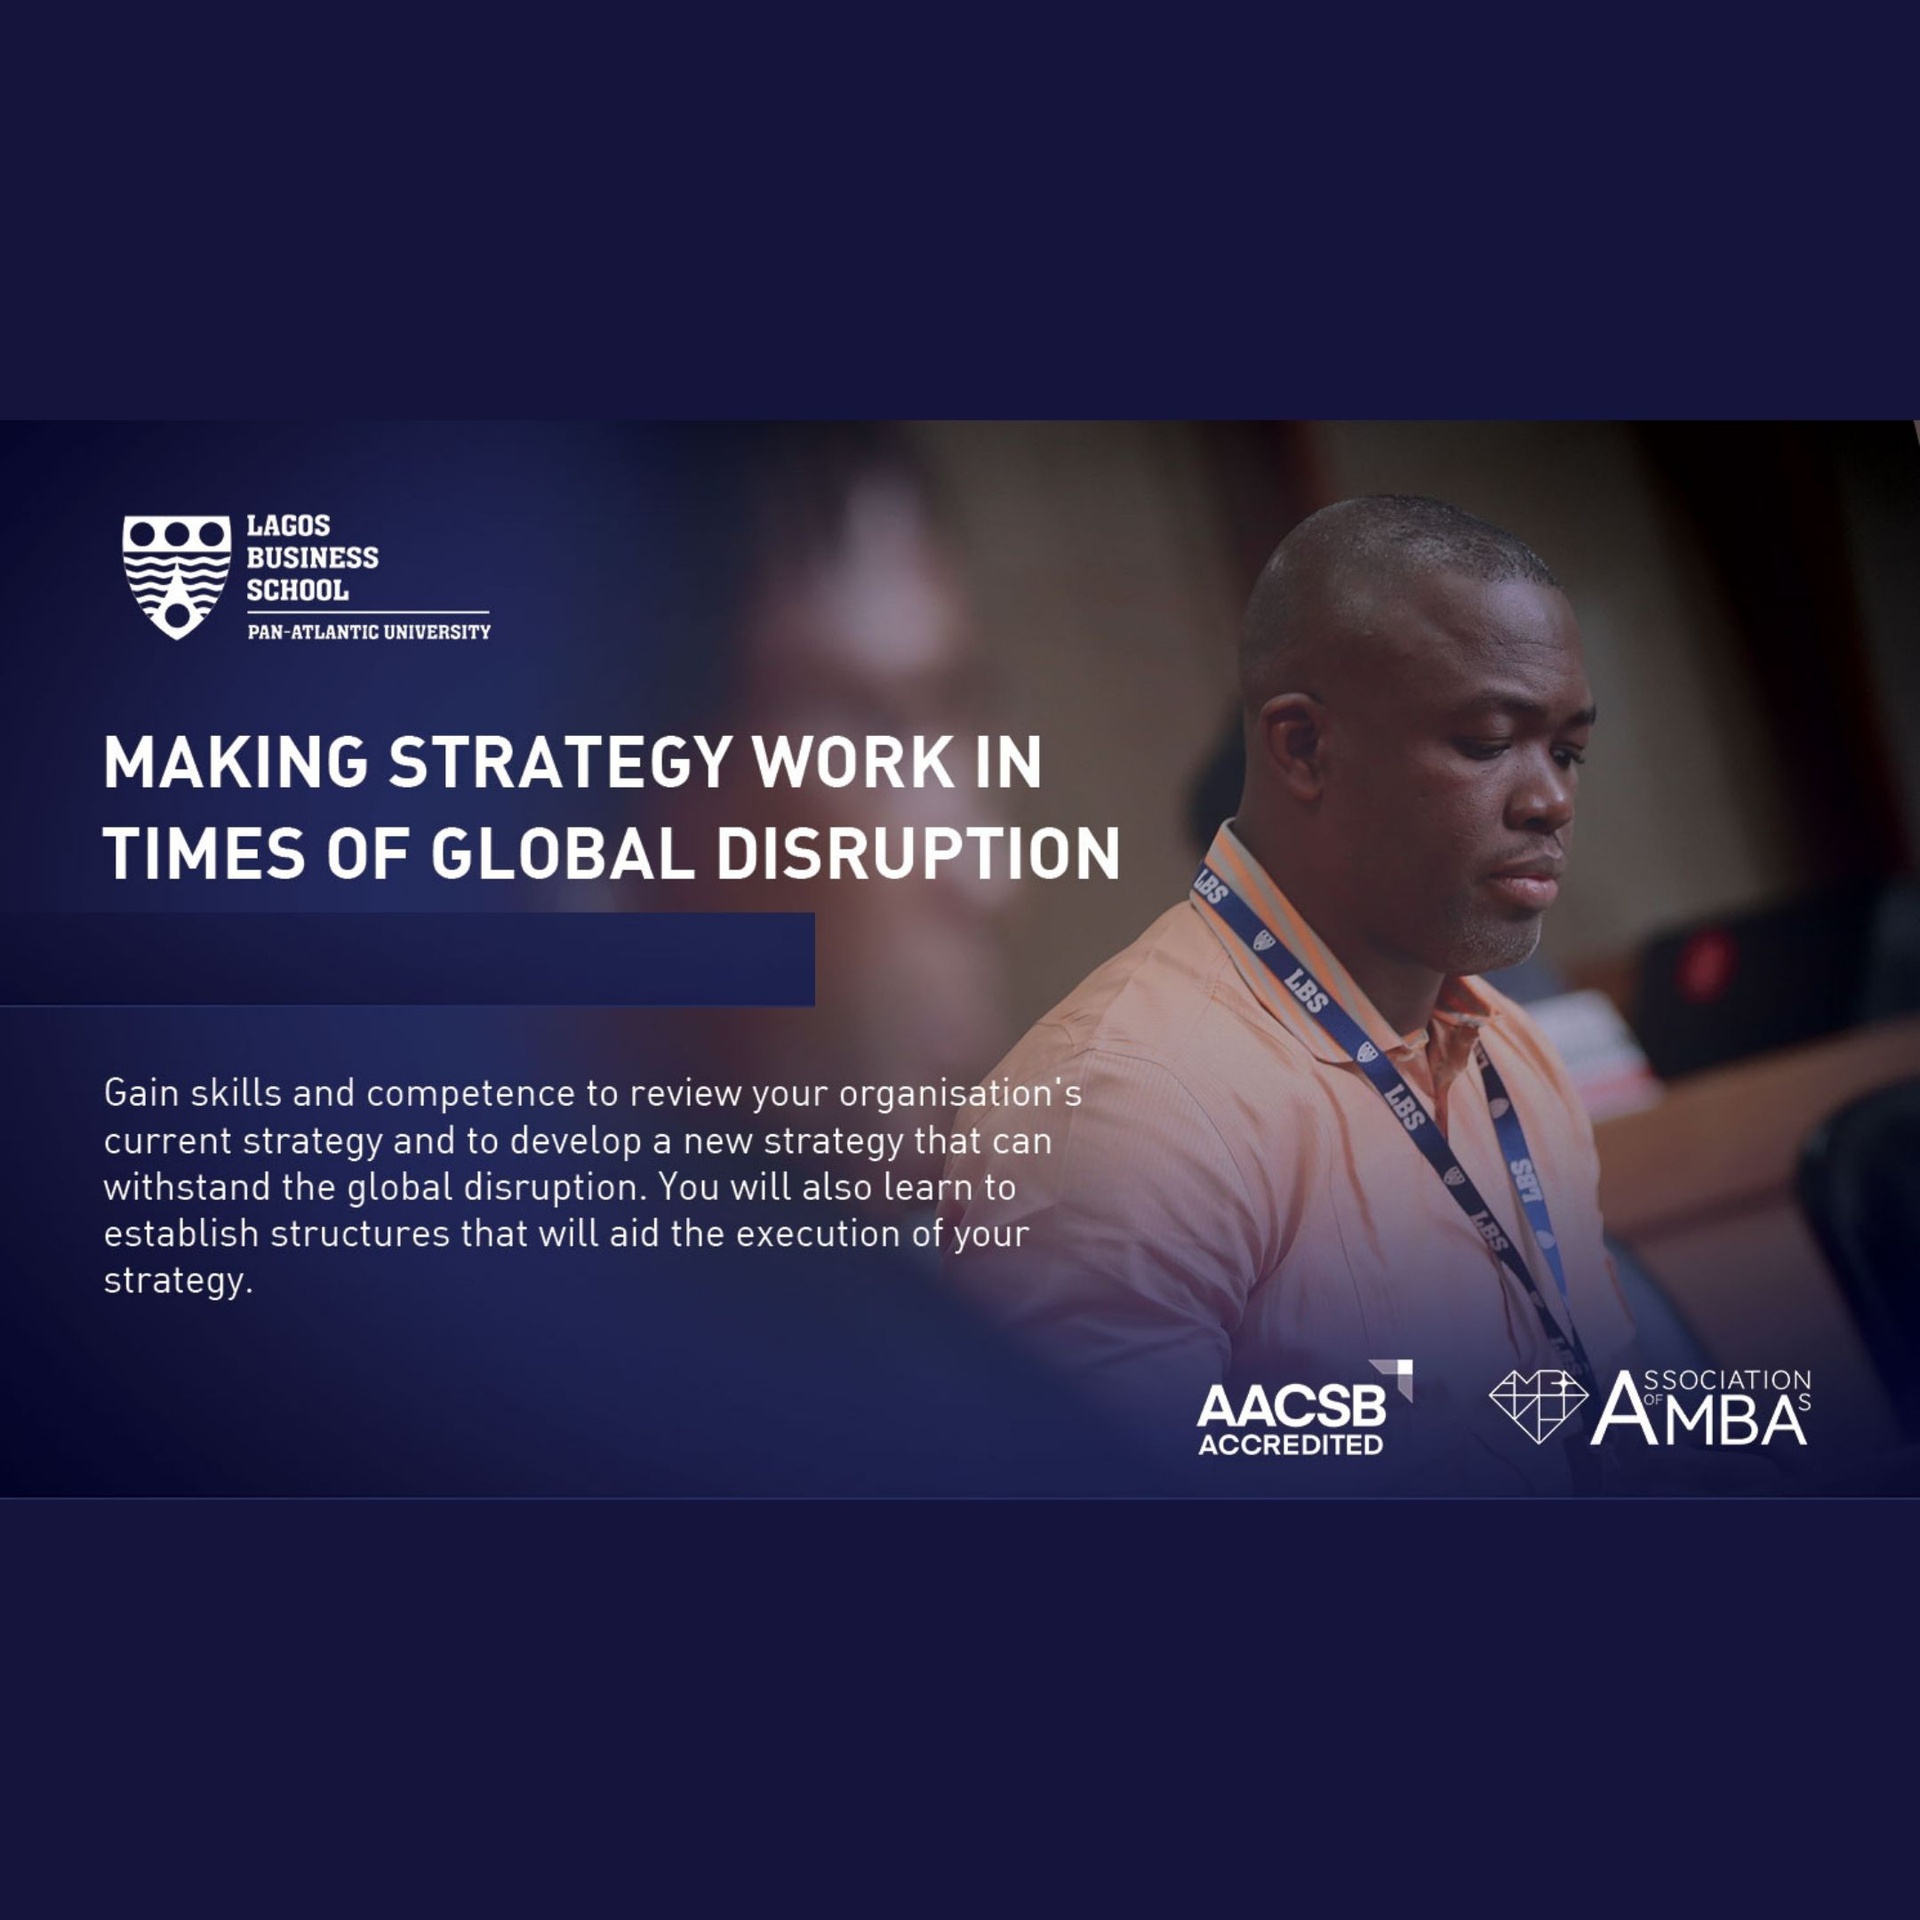 Making Strategy Work during Global Disruption